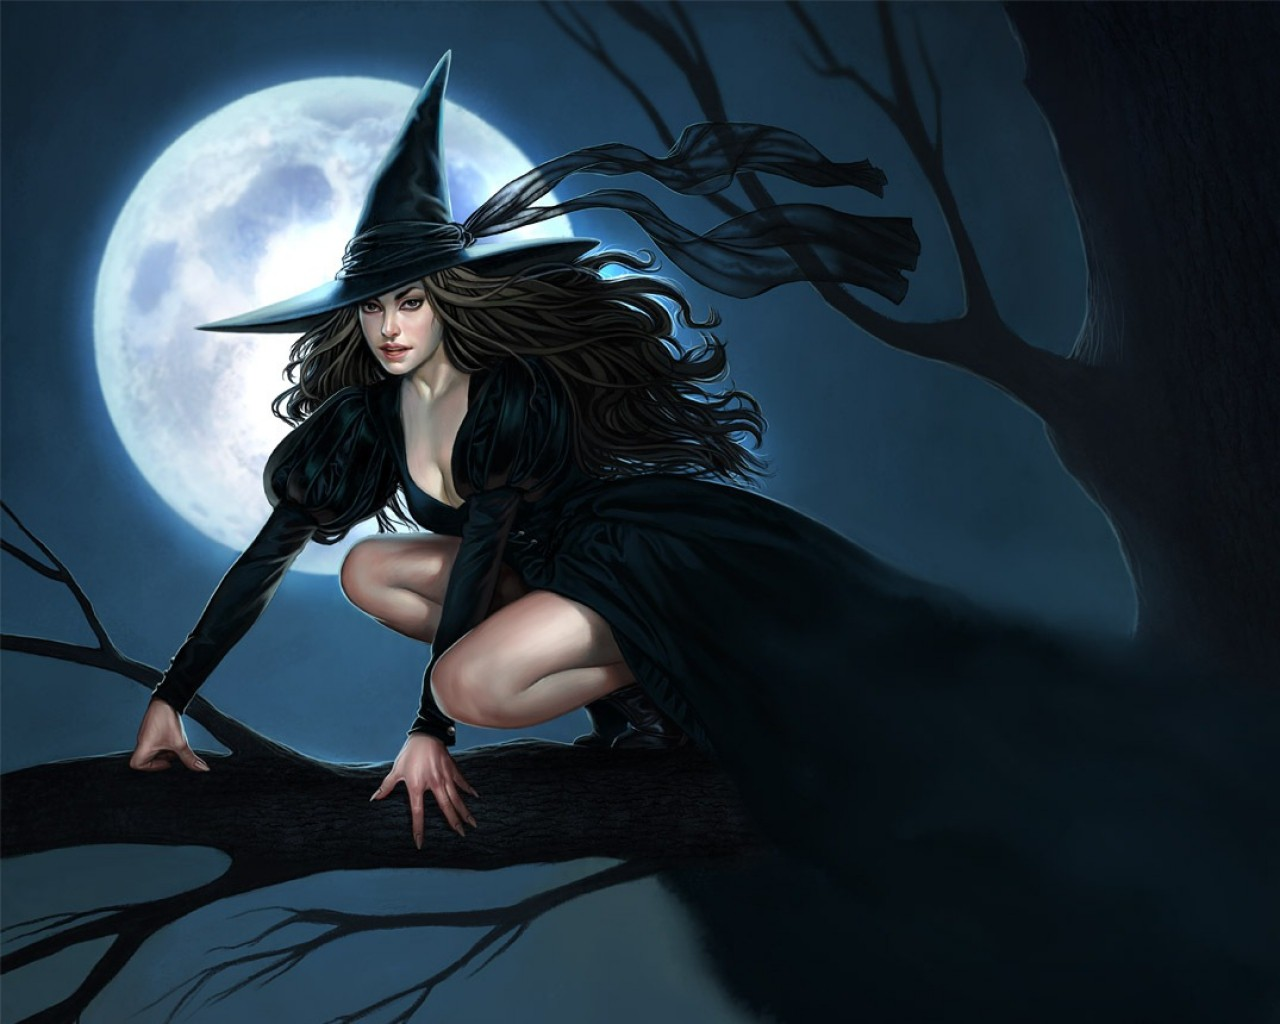 Rate Select Rating Give Sexy Halloween Witch